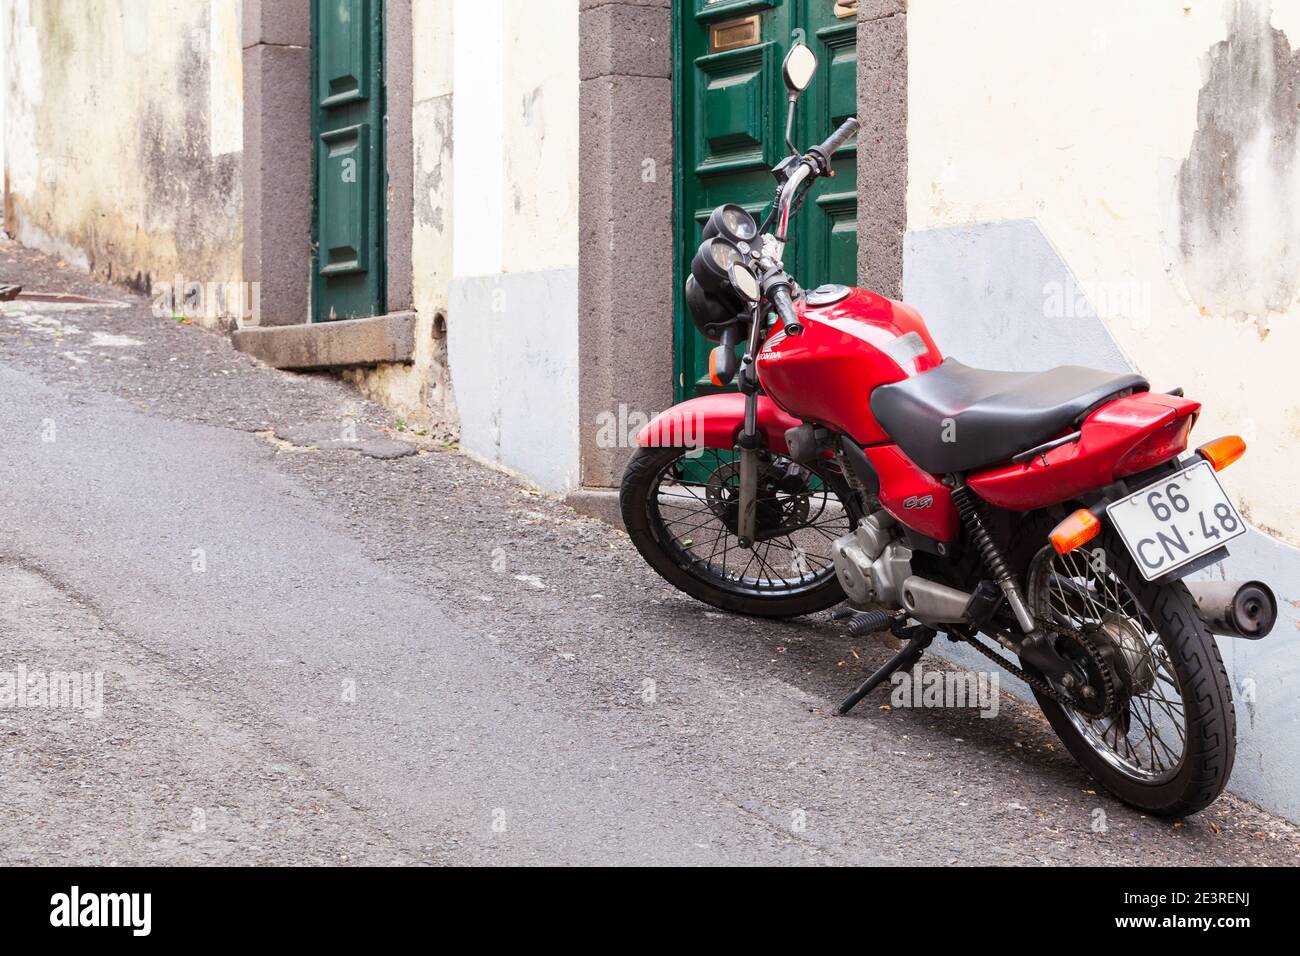 Funchal, Portugal - August 24, 2017: Red Honda CG125 or Honda CG stands parked near old wall on a narrow street, rear view. It is a commuter motorcycl Stock Photo